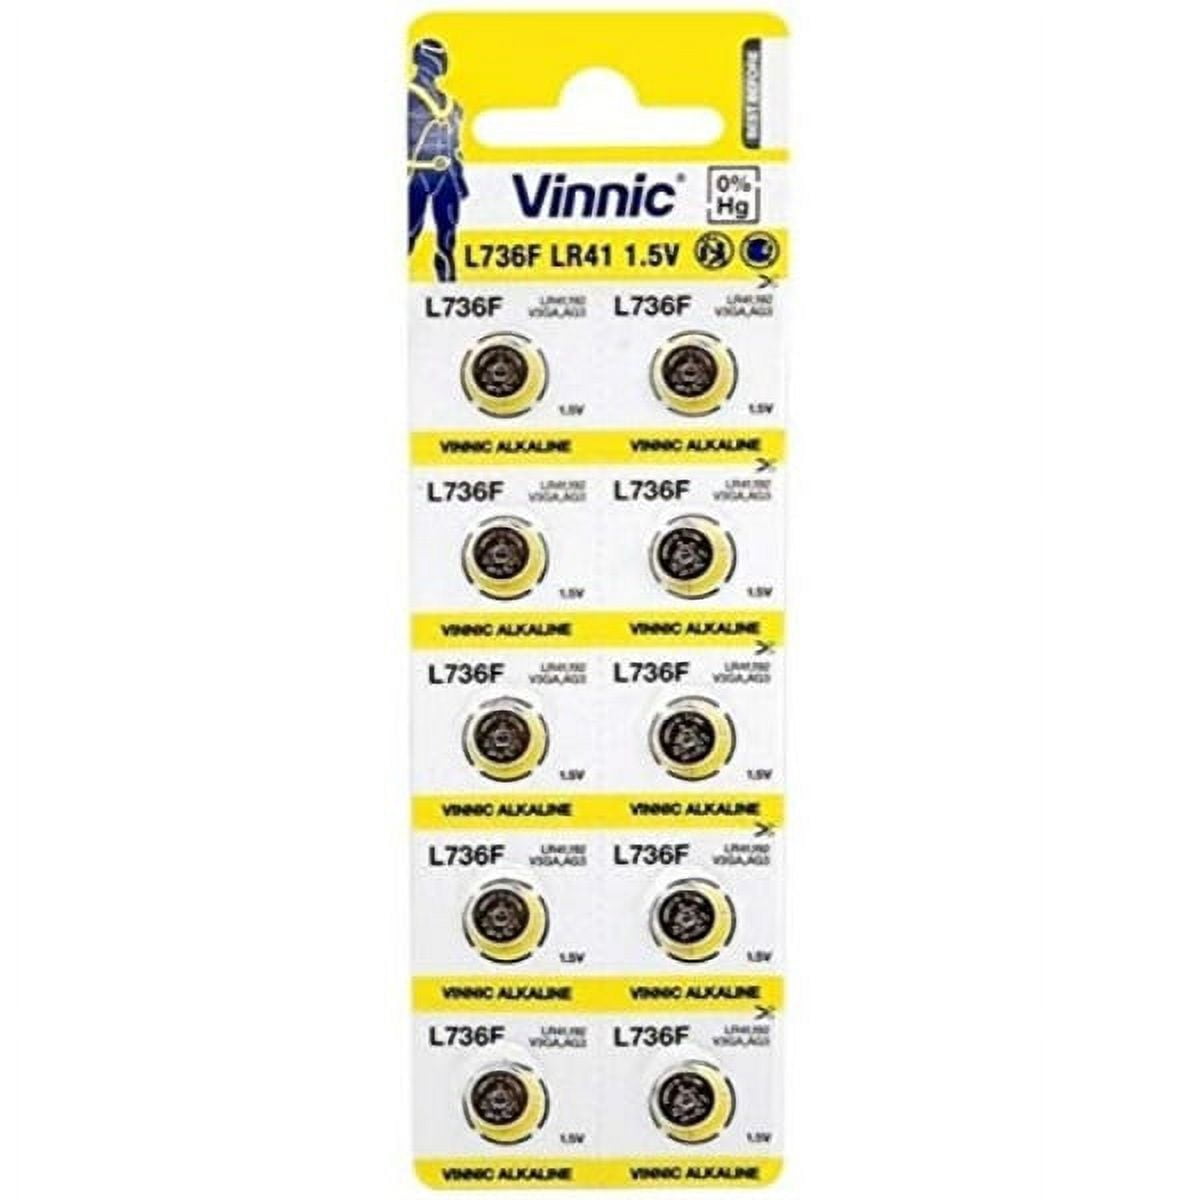 Vinnic L736F replacement battery